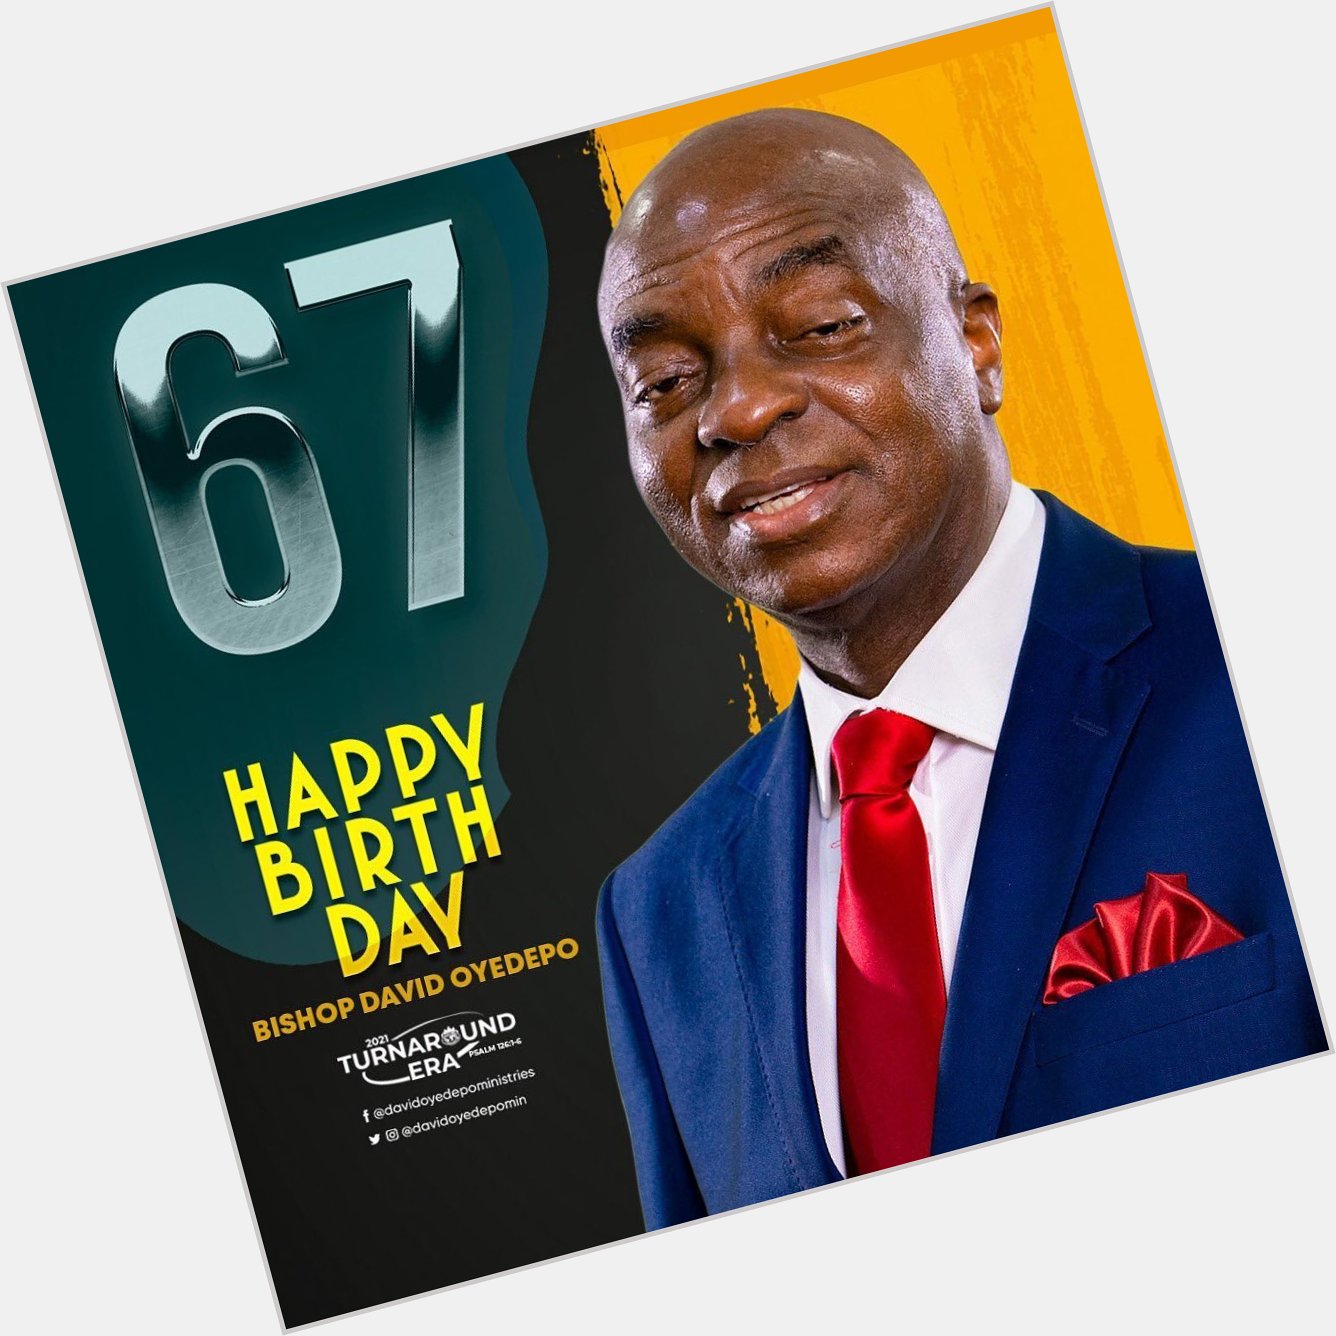 Happy birthday Bishop David Oyedepo, Sir. Thank you for being a blessing to many lives the world over. 